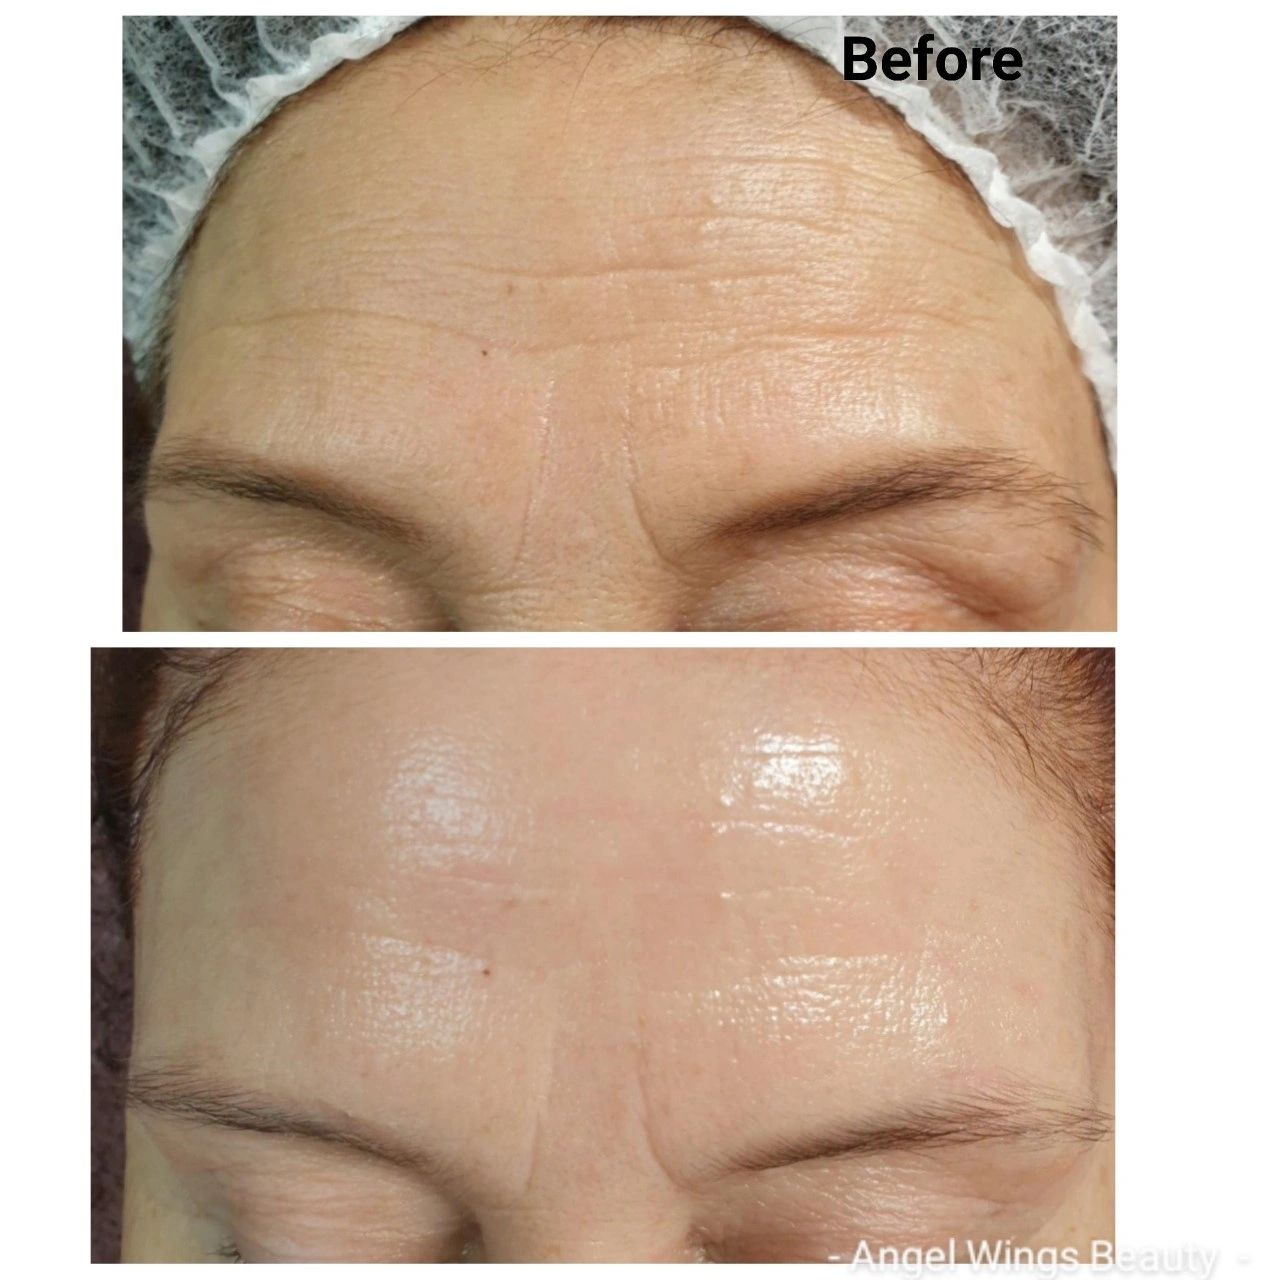 Sculplla filler treatment, filler results, plump lines and wrinkles, before and after photo. PLLA 